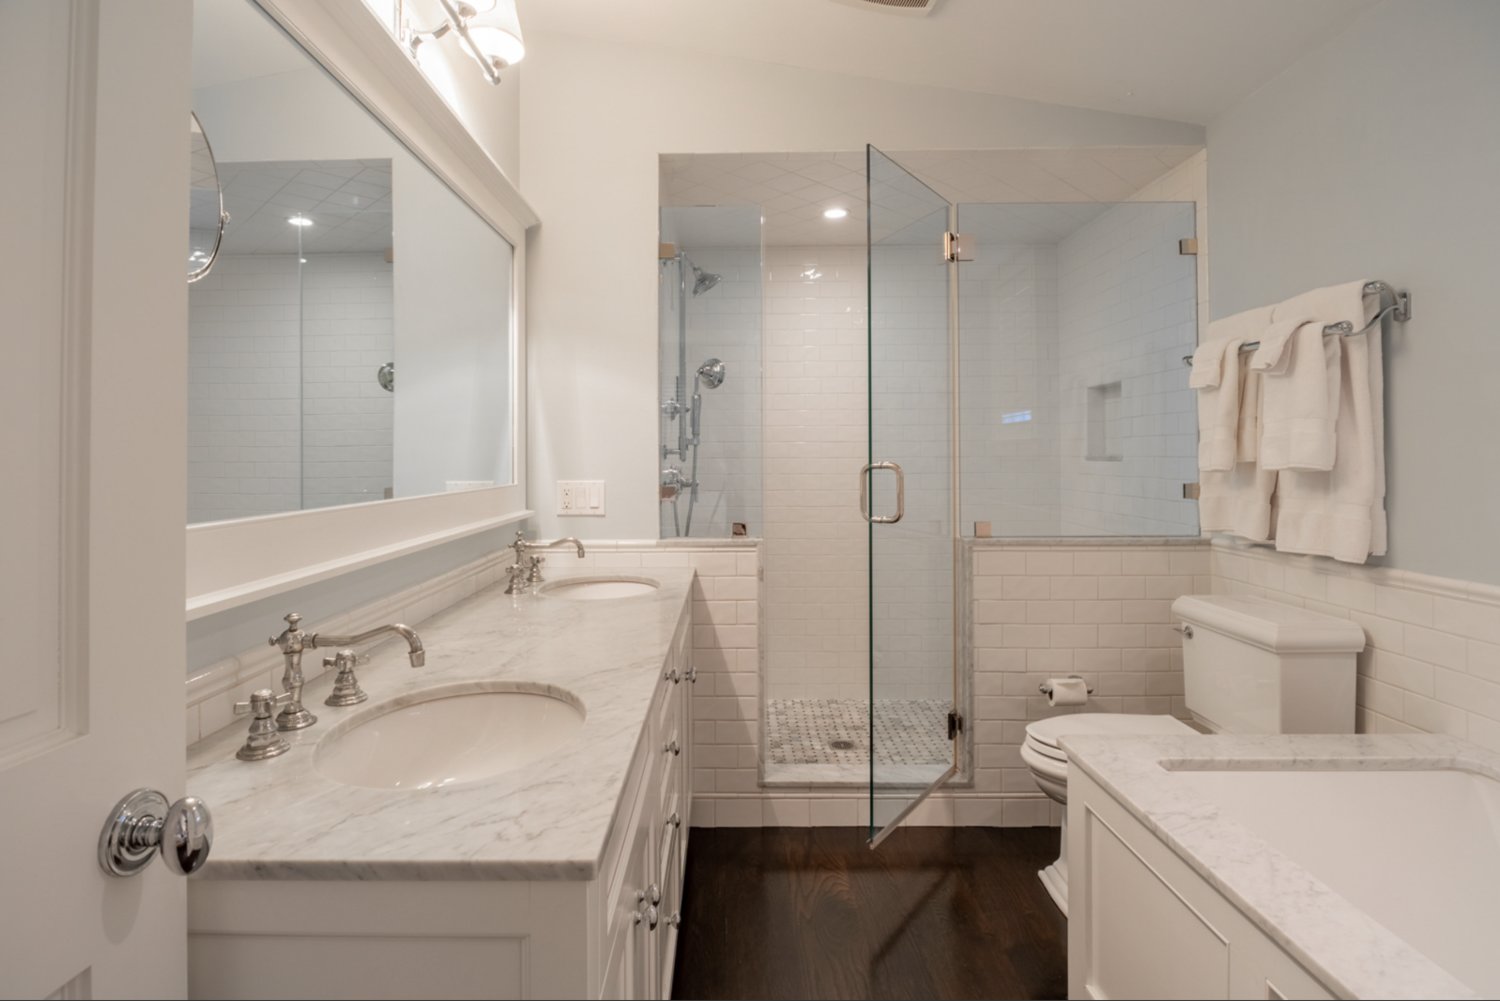 The en-suite master bath has his-and-her sinks and a glass and tile shower.